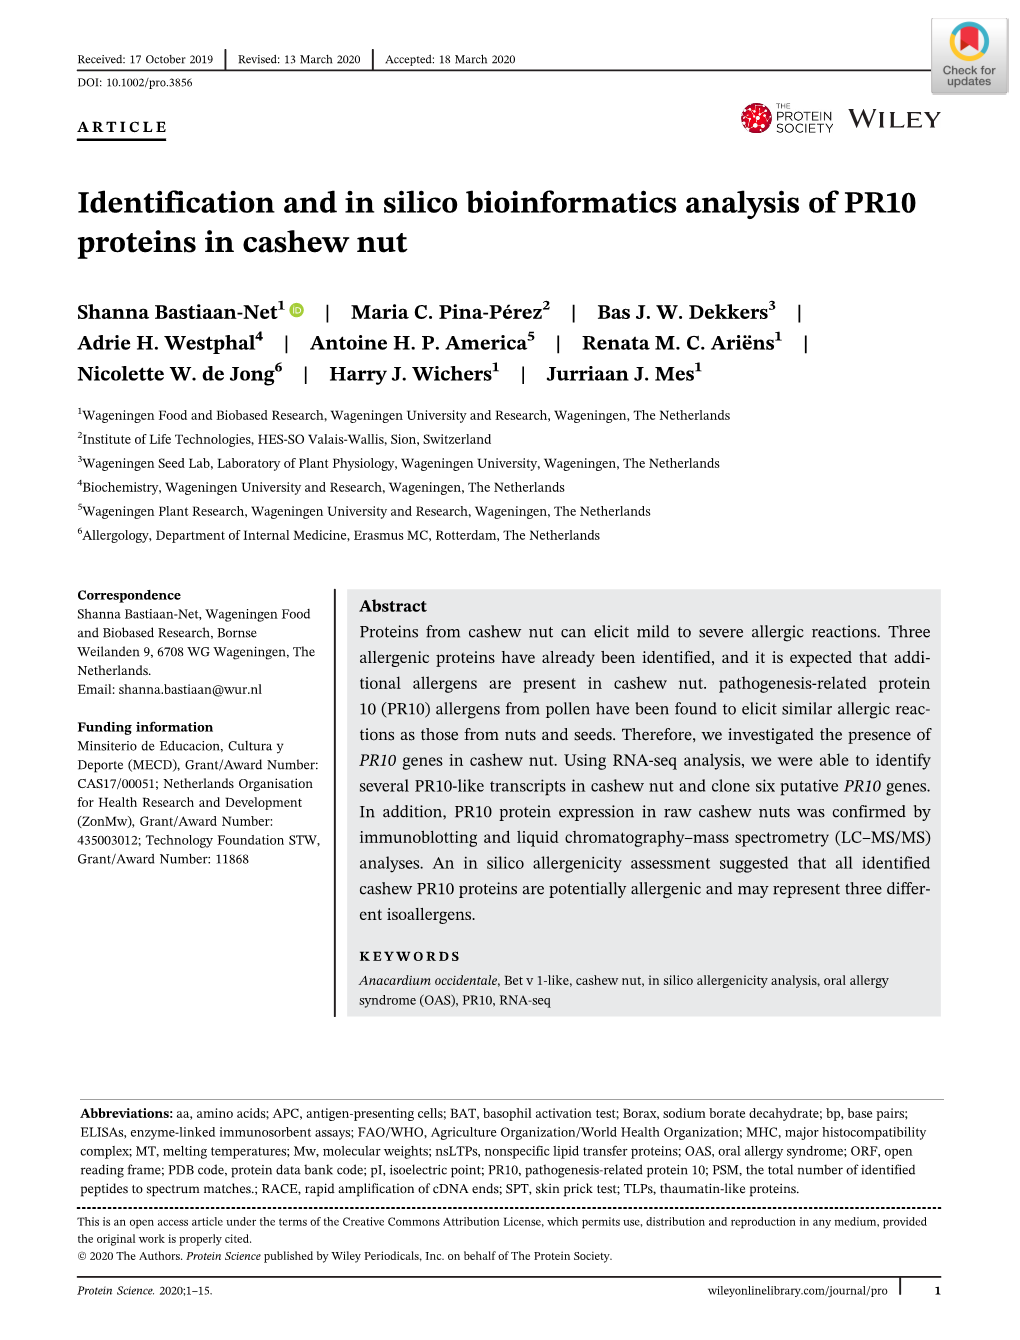 Identification and in Silico Bioinformatics Analysis of PR10 Proteins in Cashew Nut